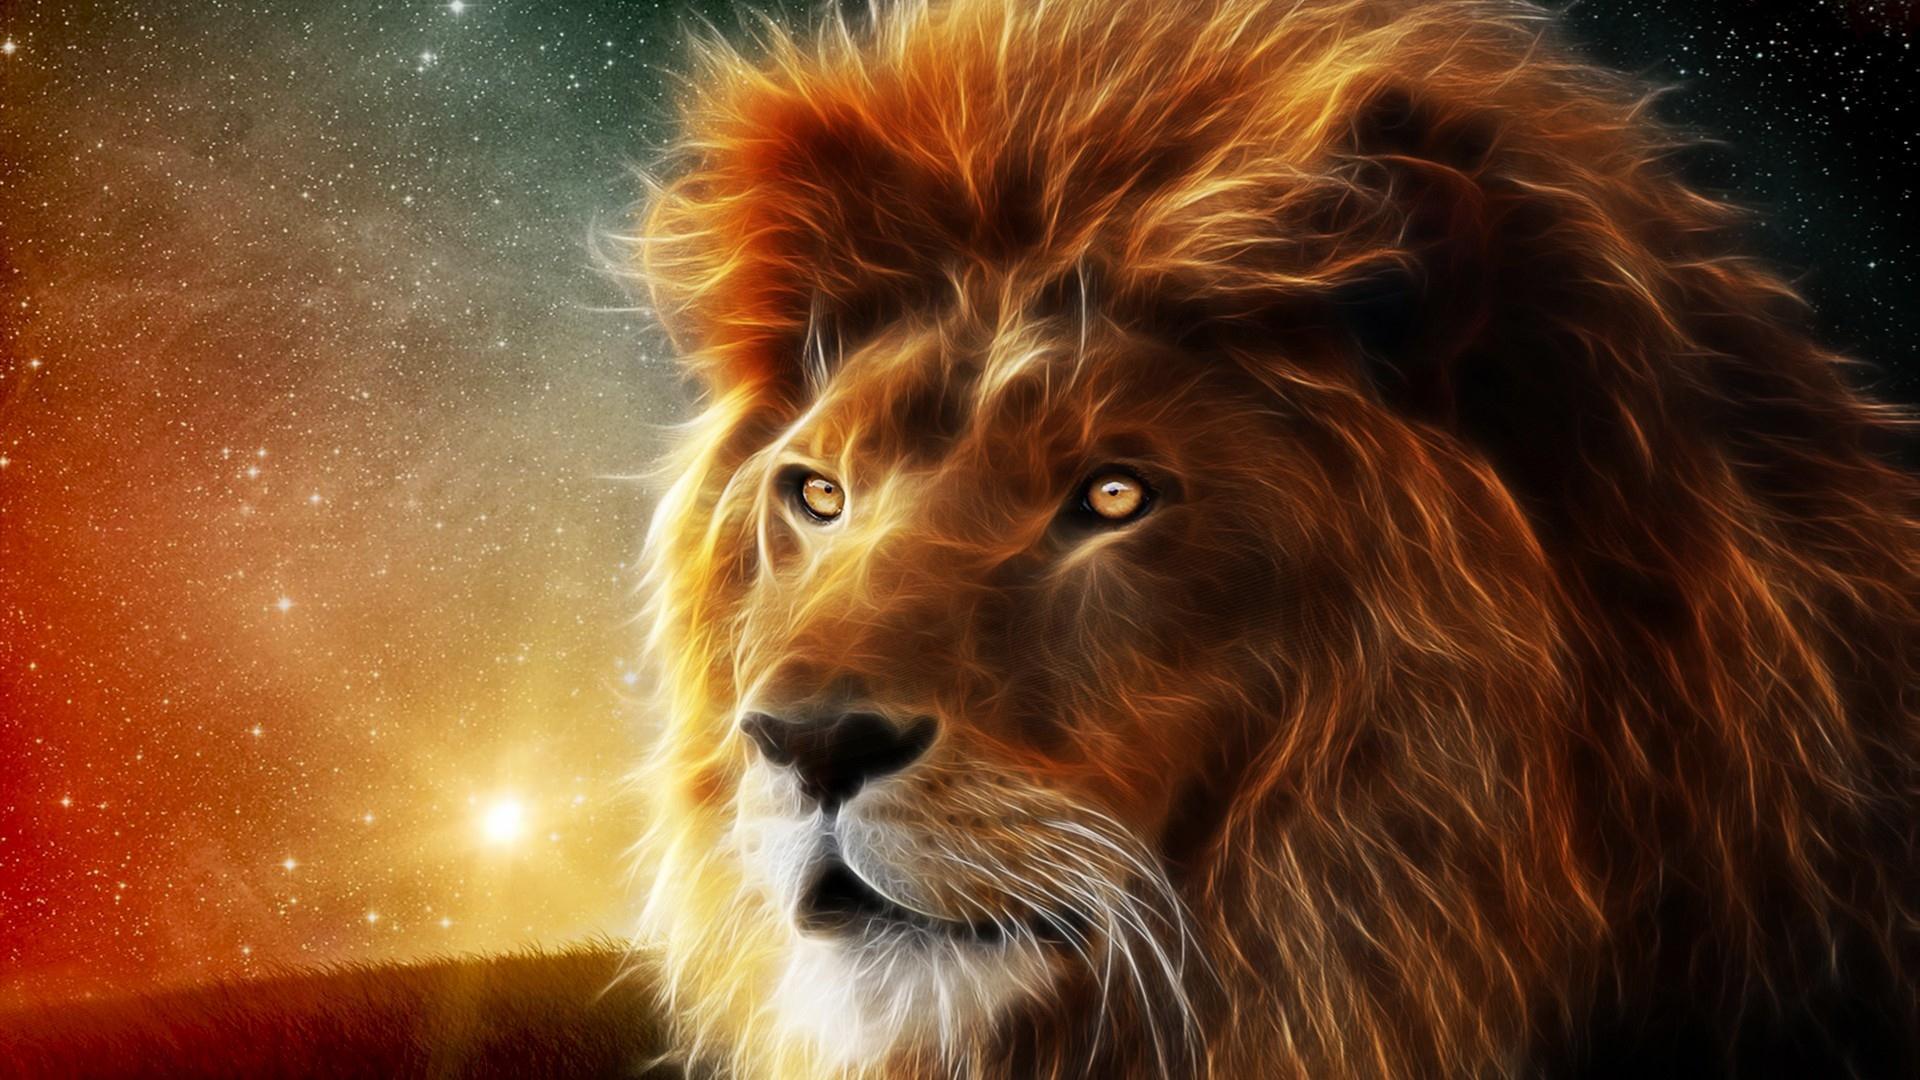 Abstract Lion Wallpaper